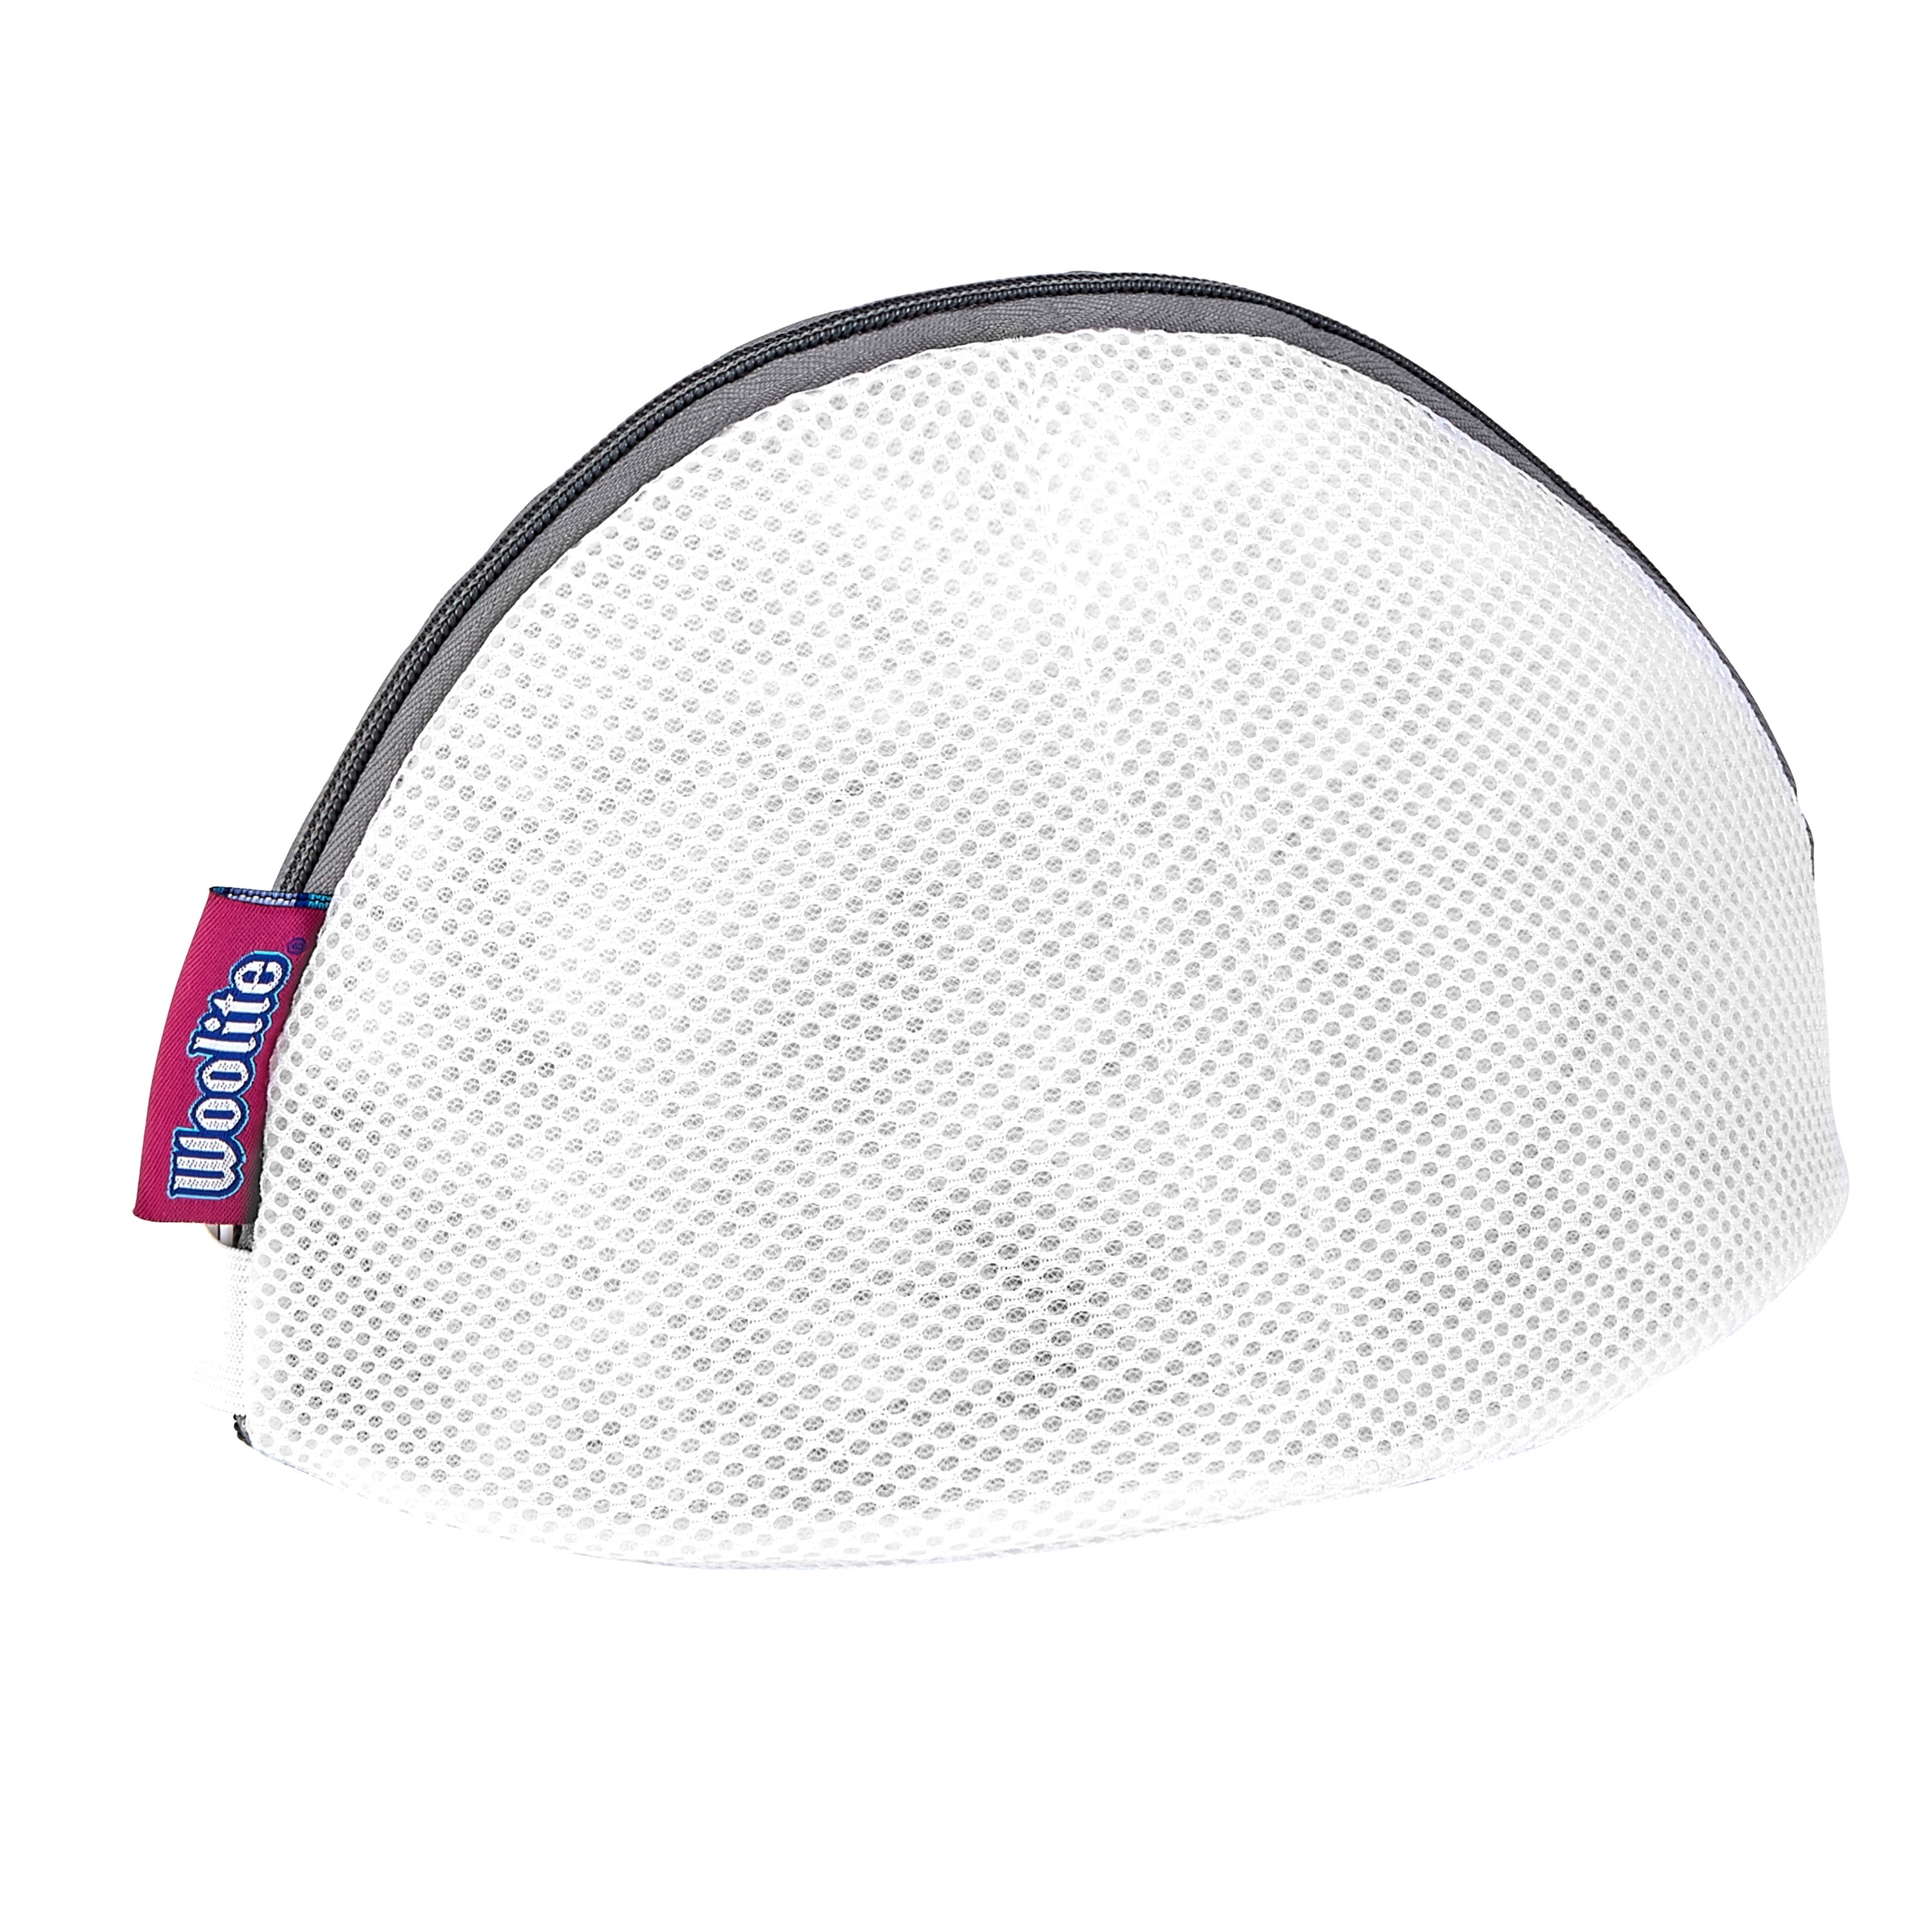 Search for Bra Wash Bag  Discover our Best Deals at Bed Bath & Beyond